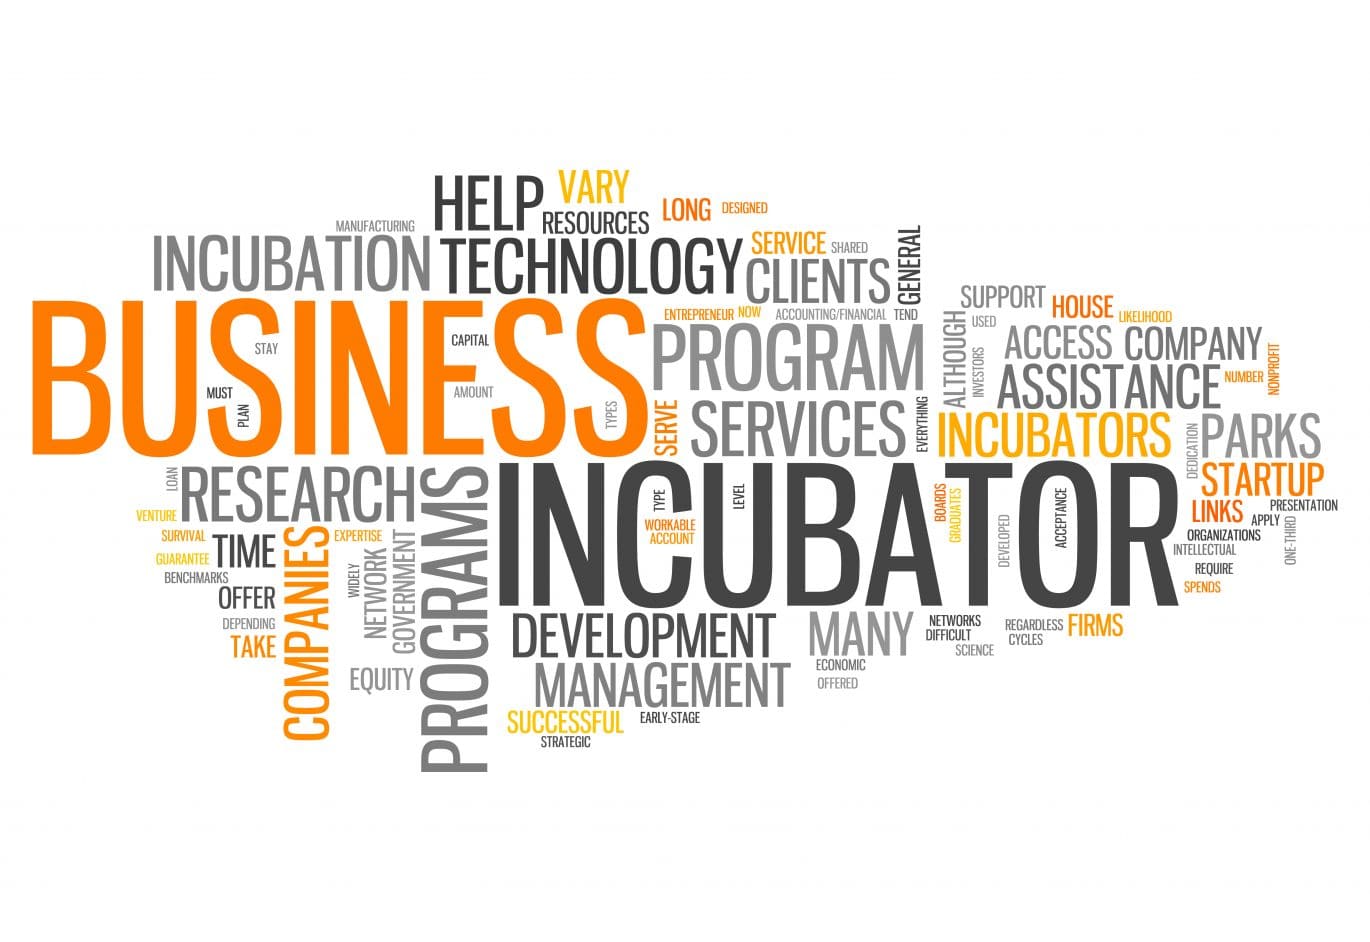 What does business incubation mean